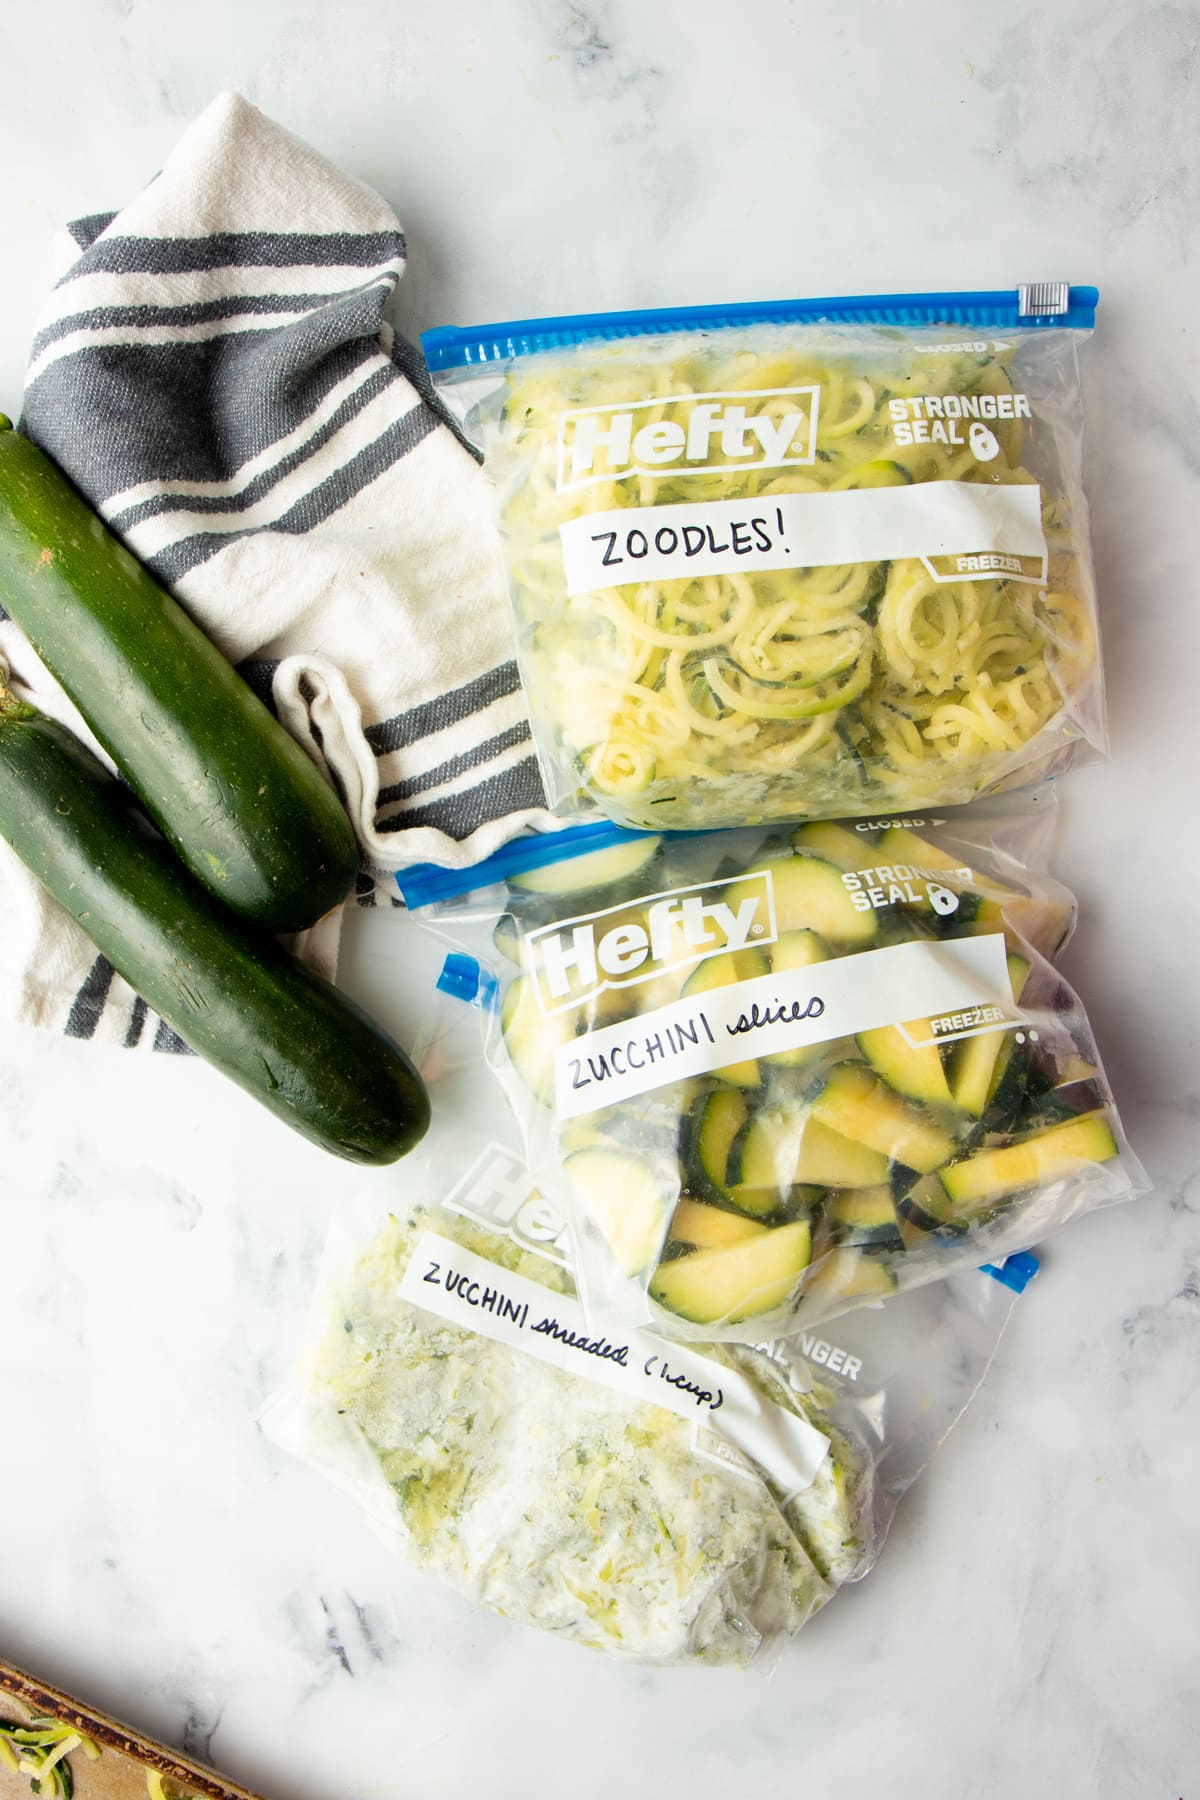 Three Hefty freezer bags filled with frozen sliced zucchini, frozen zucchini noodles, and frozen shredded zucchini.